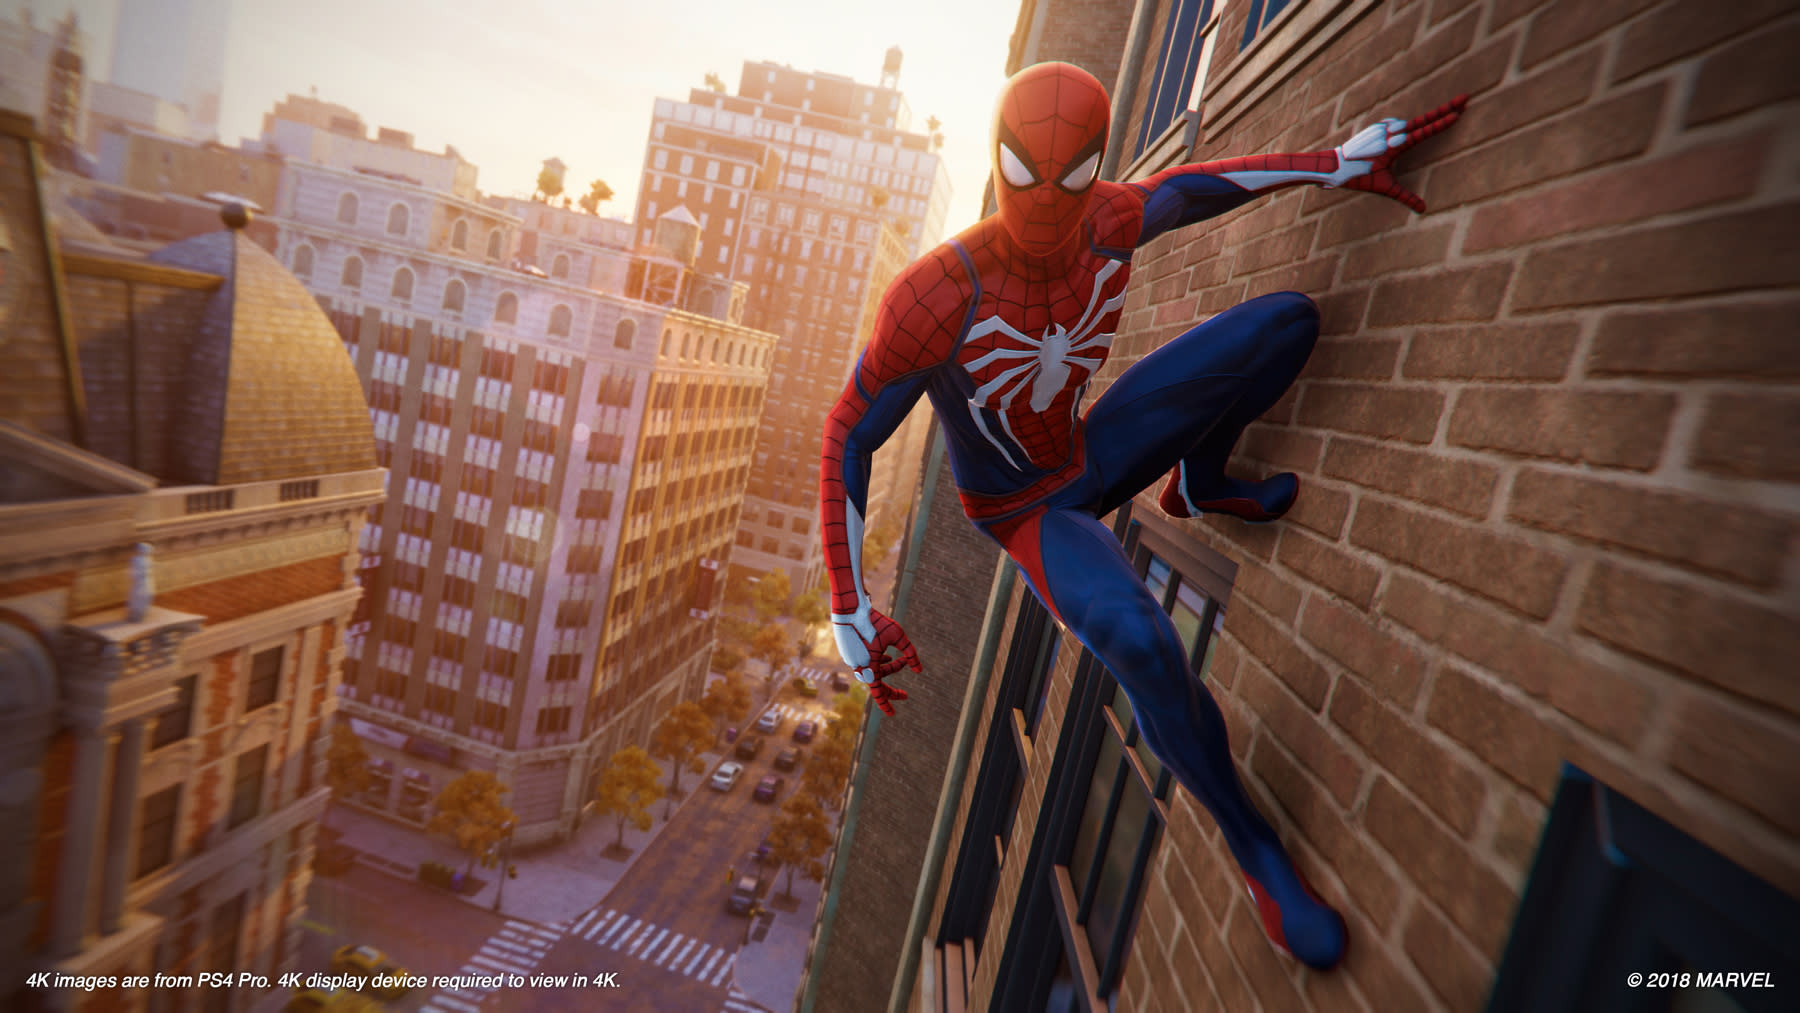 New York shines in Sony's new 'Spider-Man' game | Engadget